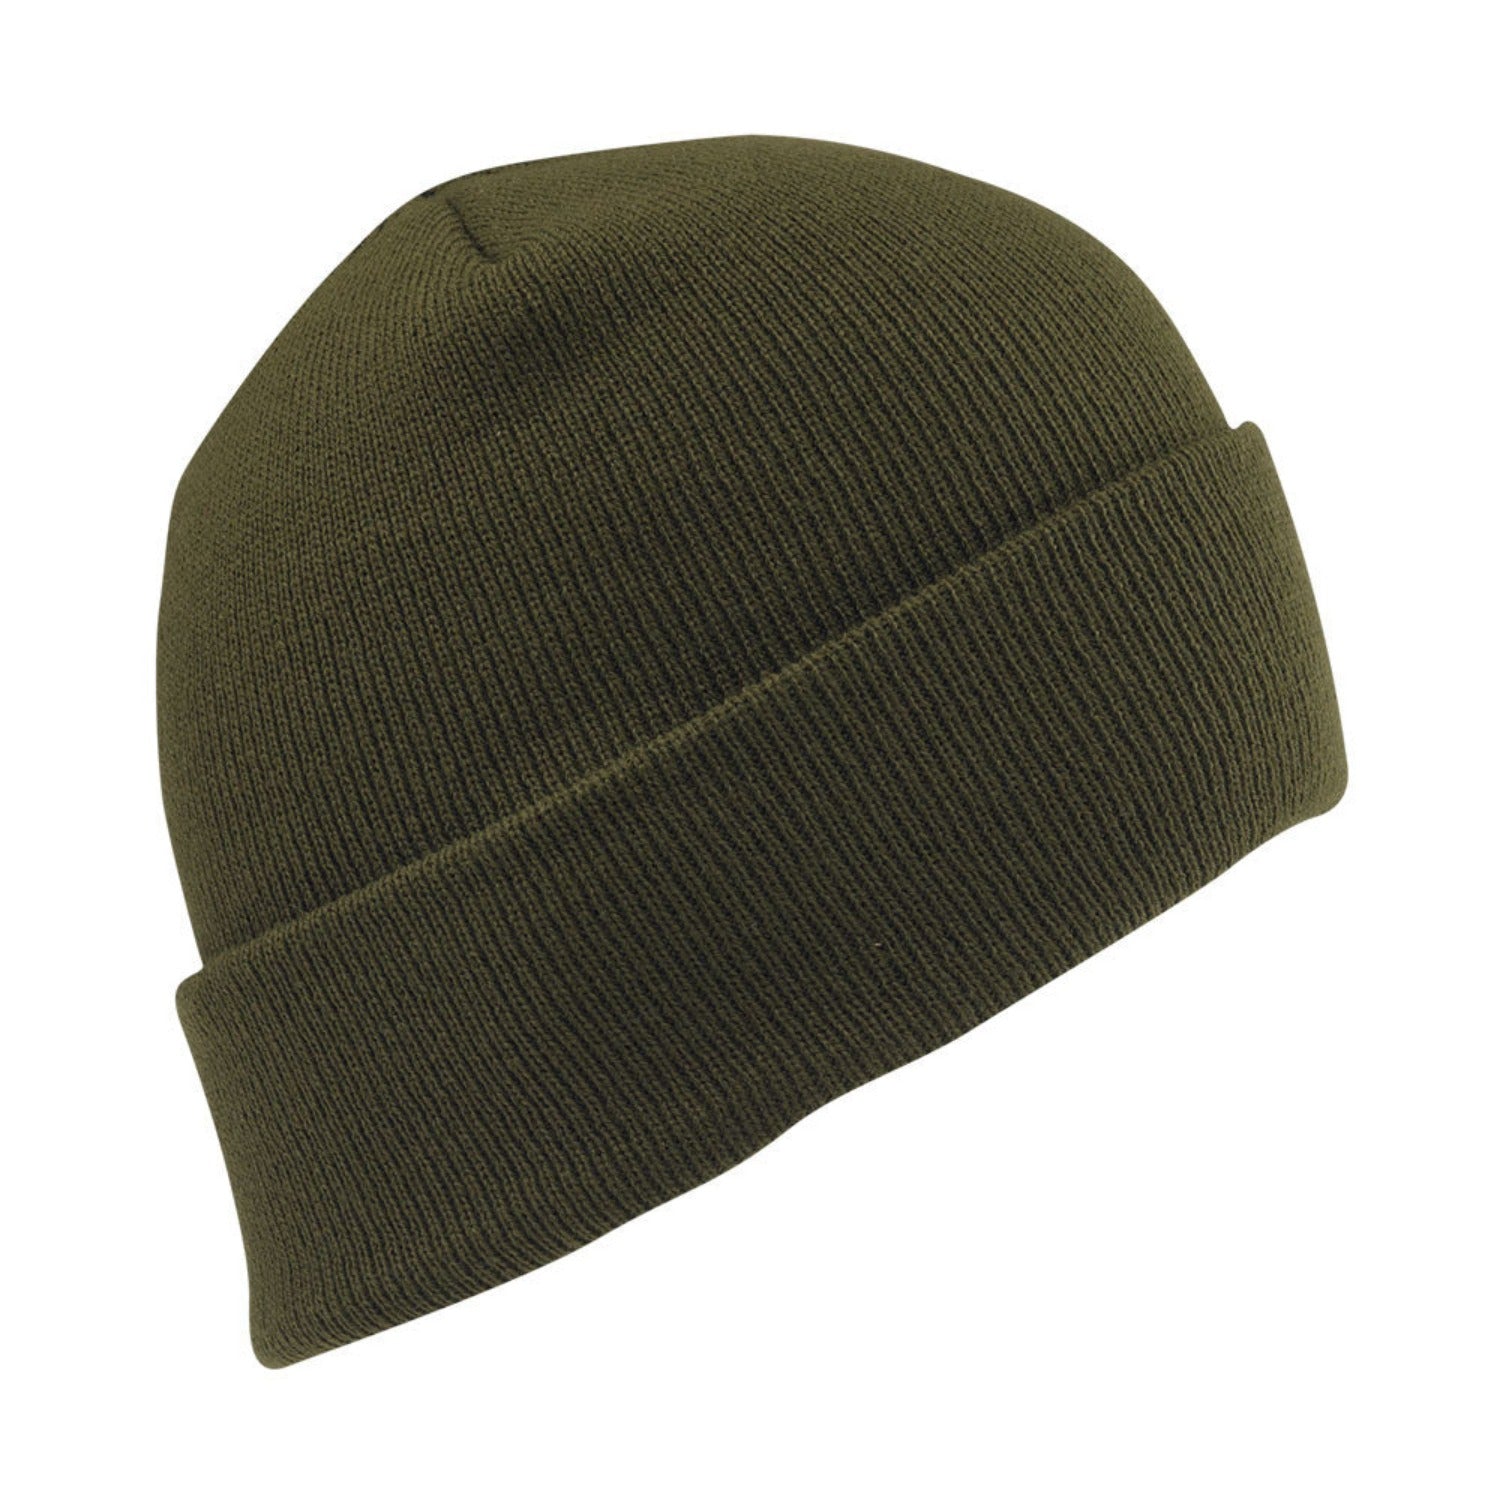 1017 Acrylic Hat - New Olive full product perspective - made in The USA Wigwam Socks